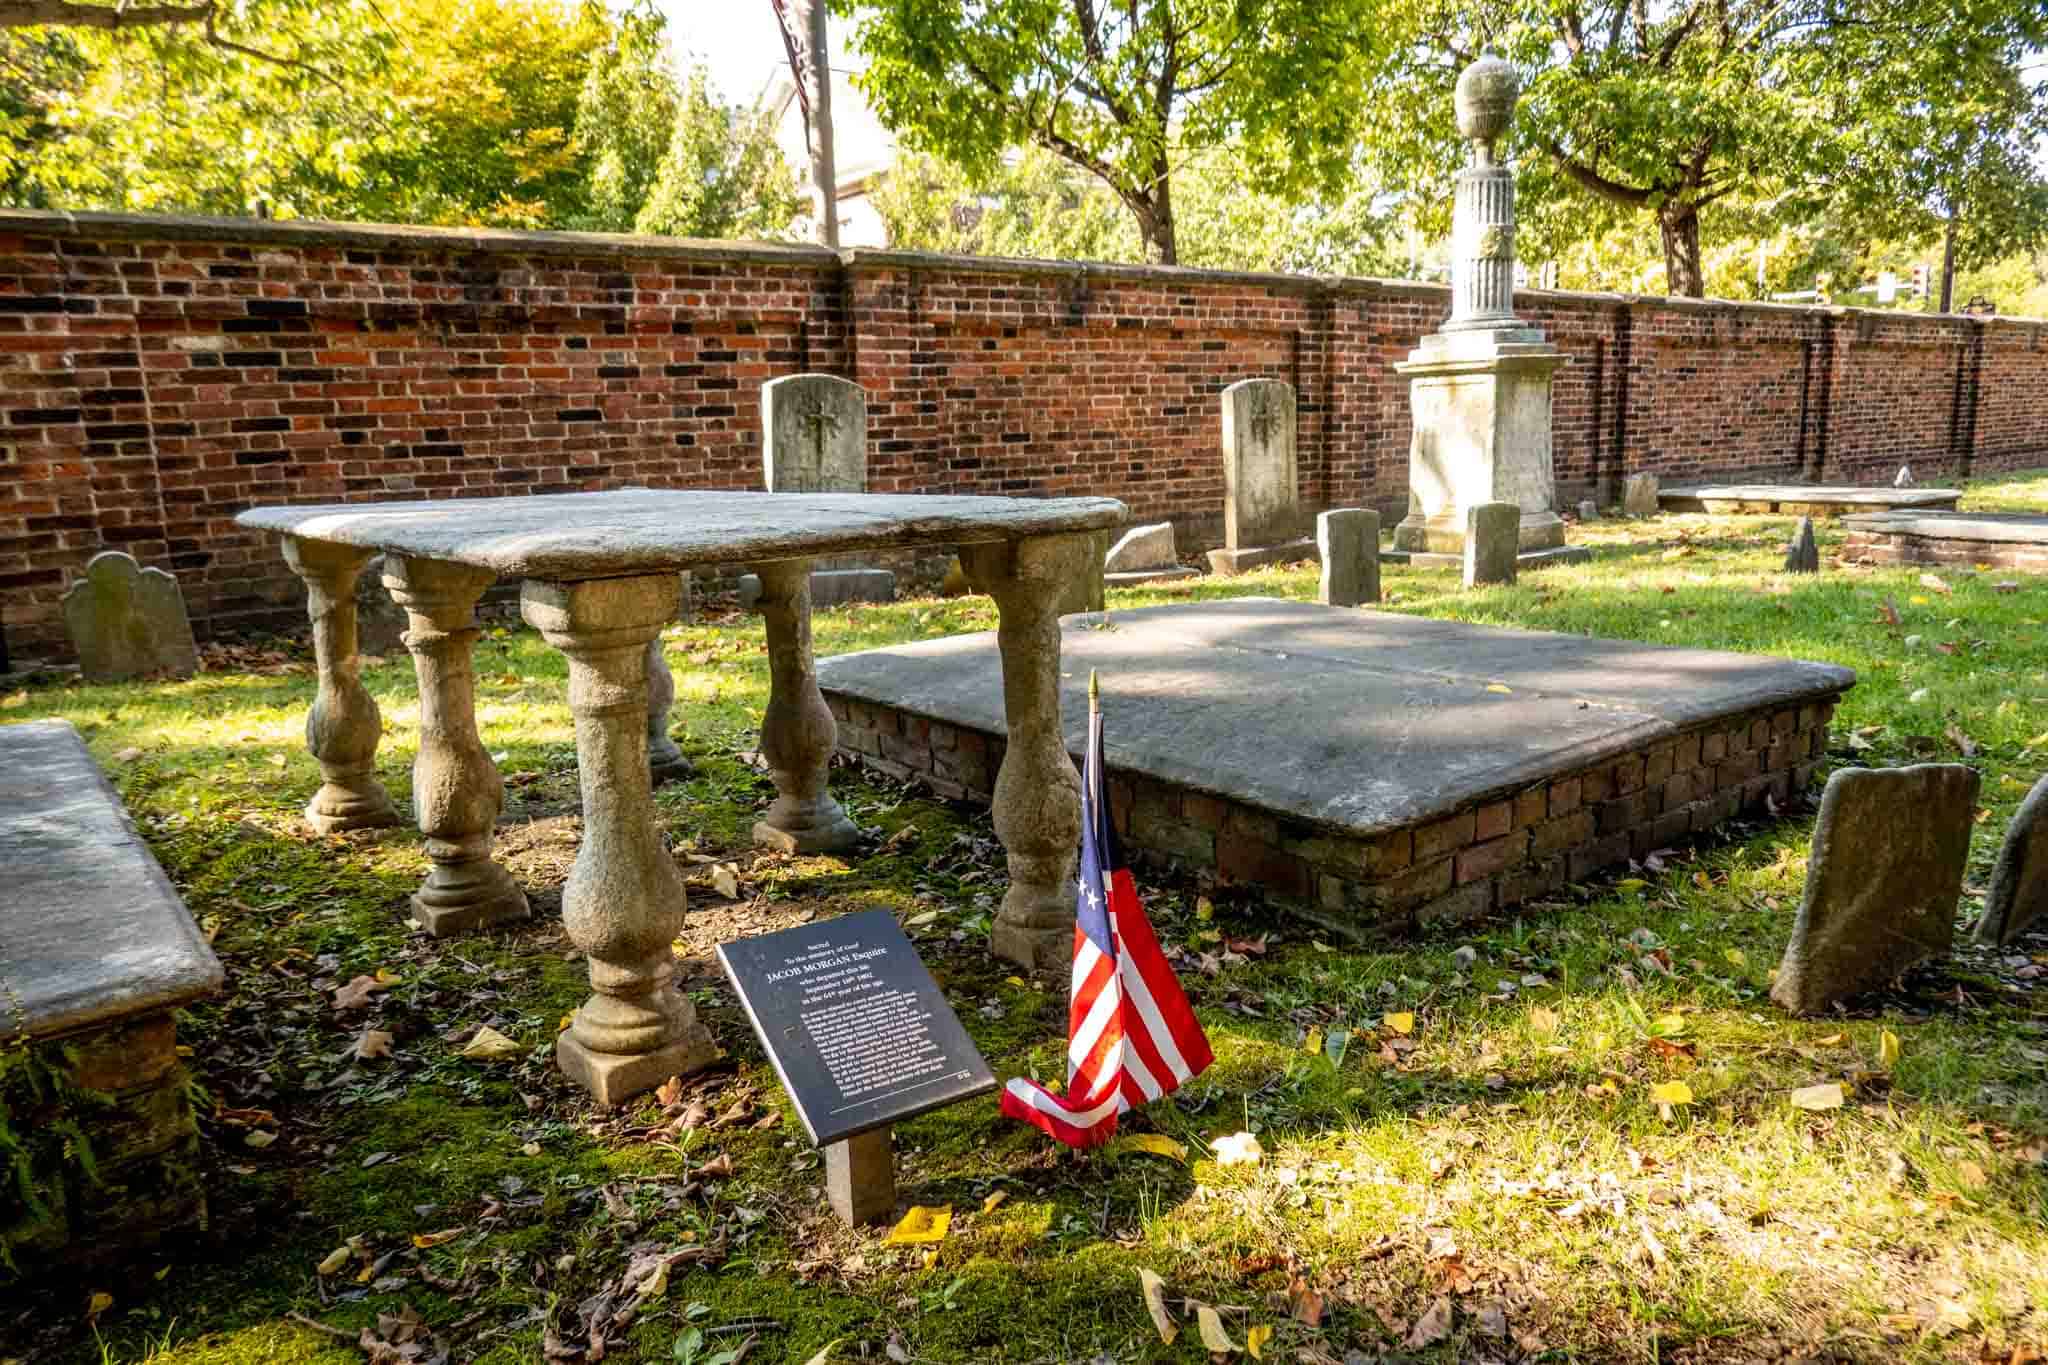 Table-shaped grave marker with a plaque with information about Jacob Morgan marked with an American flag